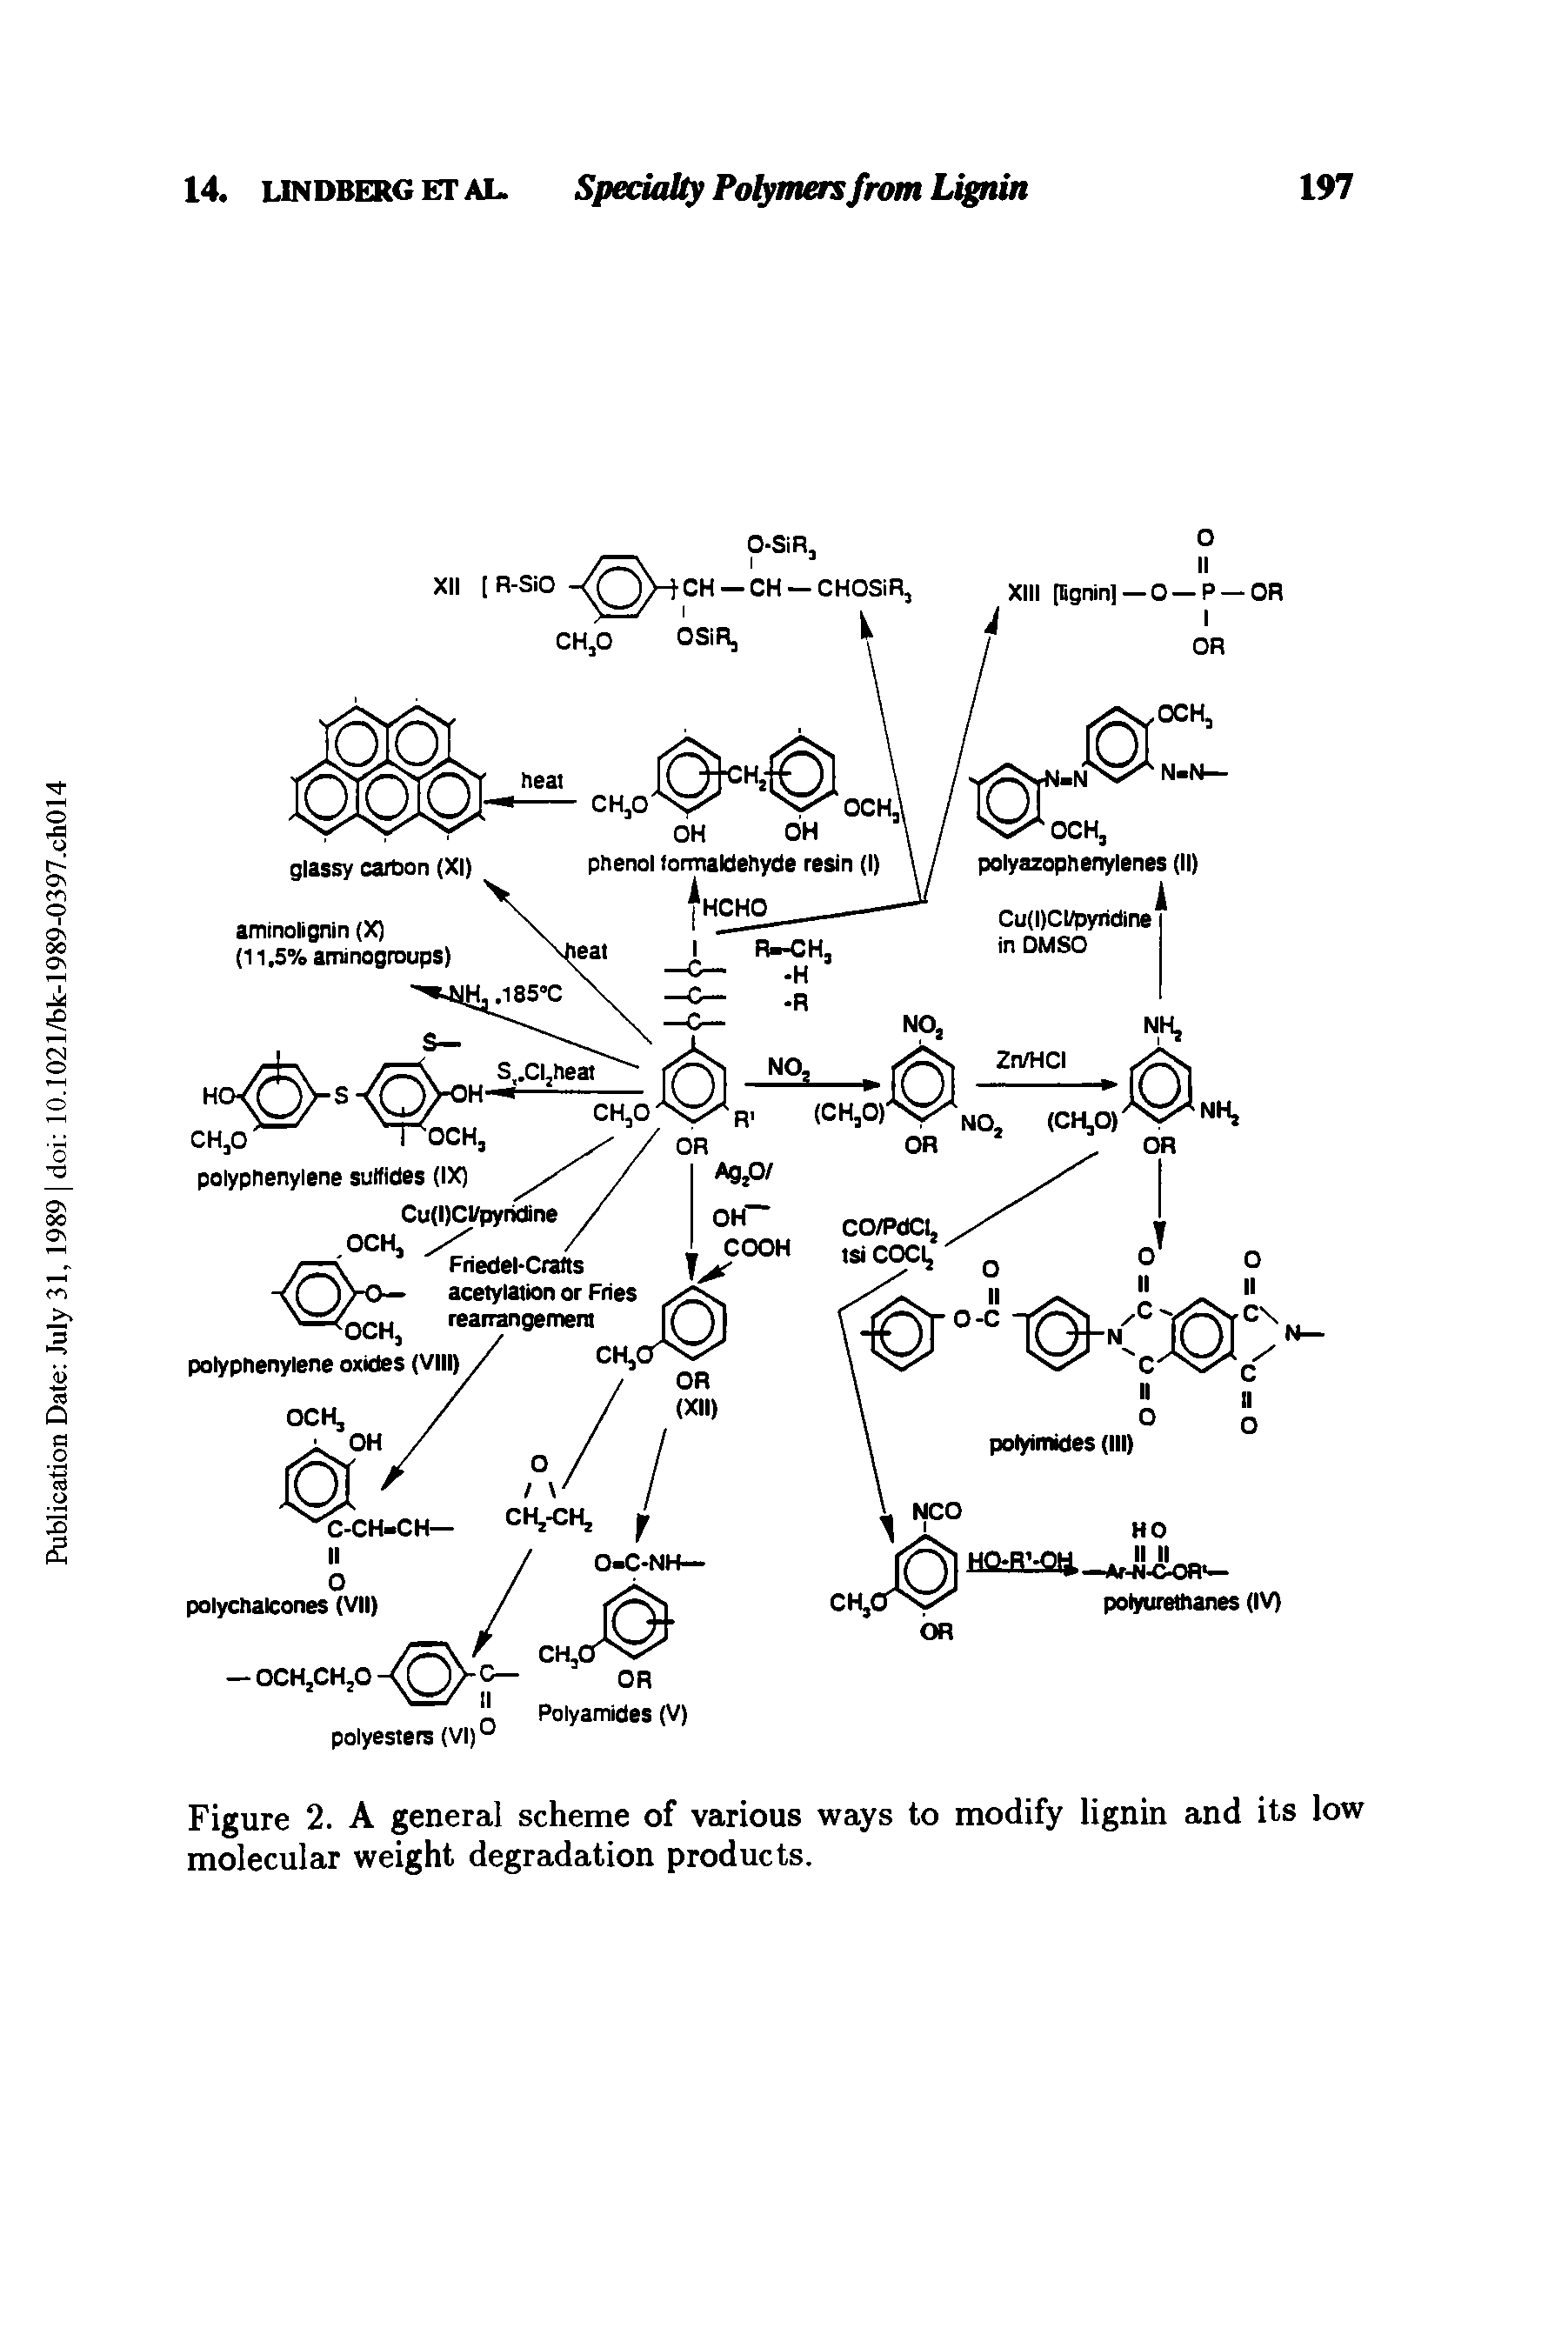 Figure 2. A general scheme of various ways to modify lignin and its low molecular weight degradation products.